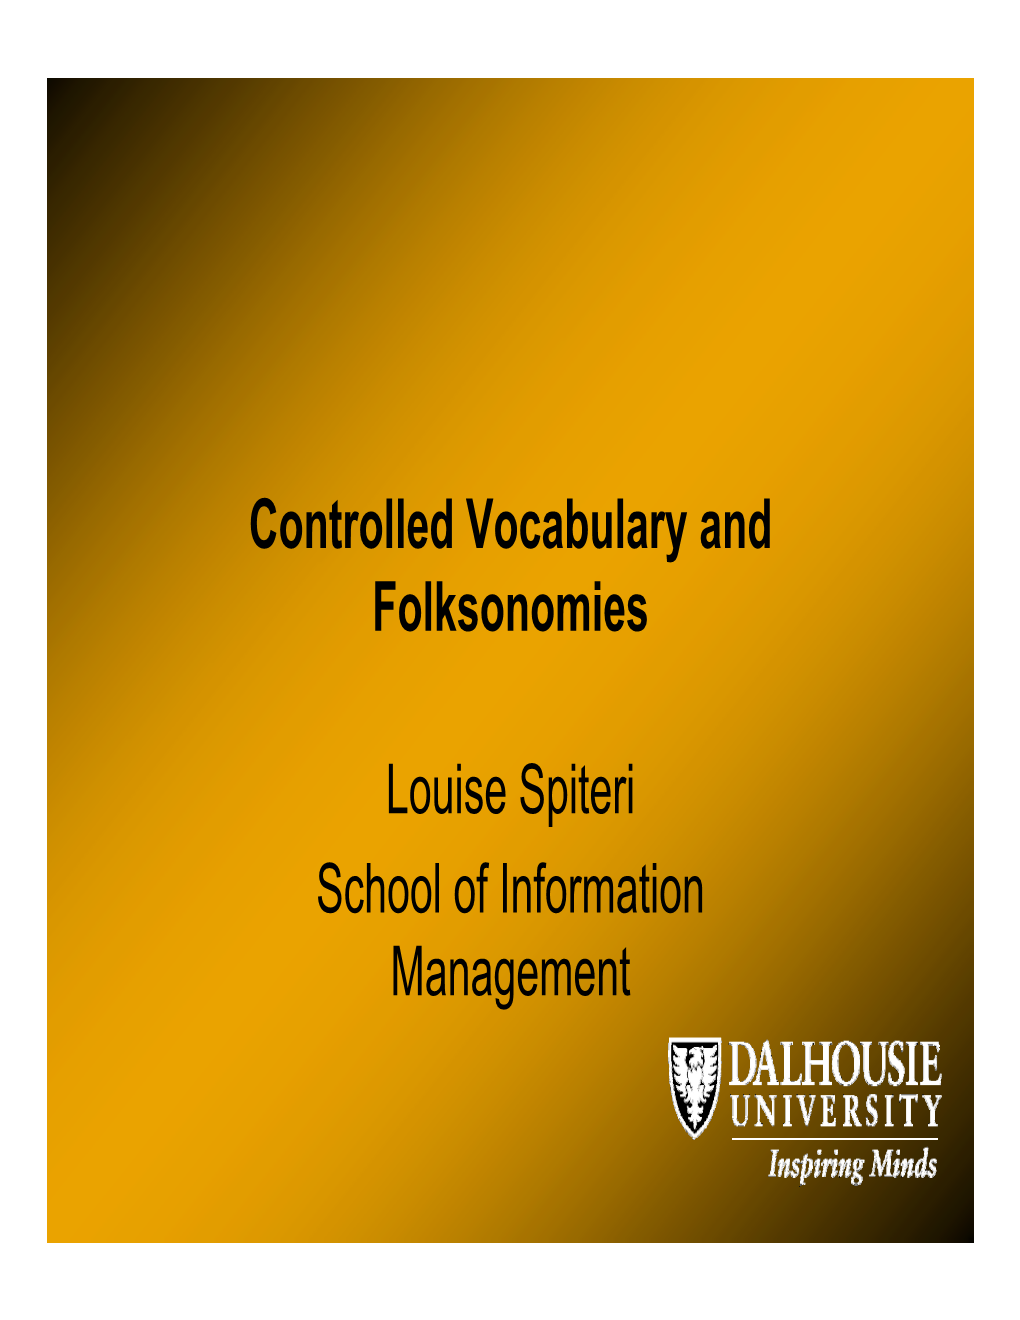 Controlled Vocabulary and Folksonomies